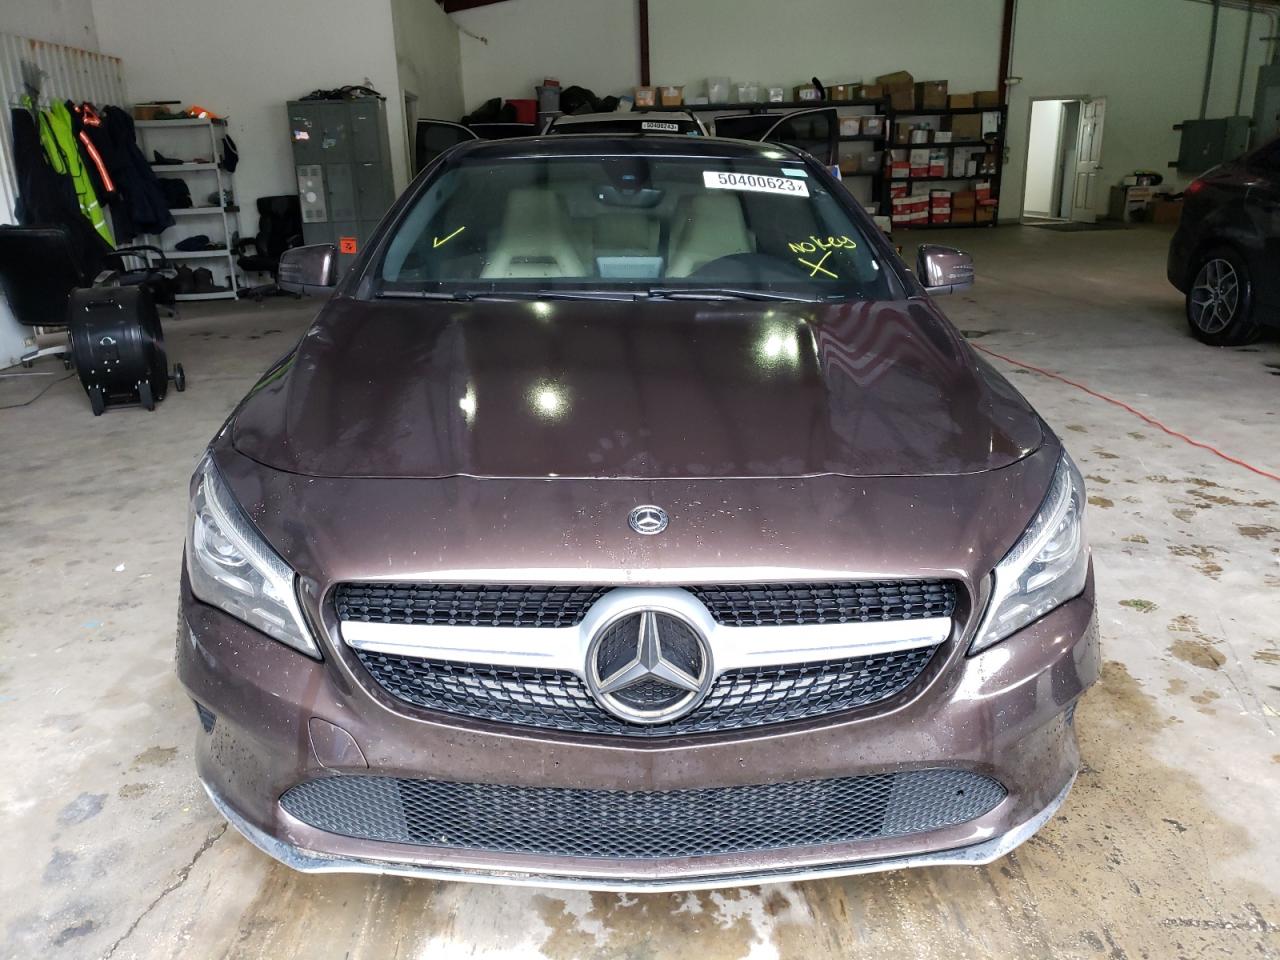 WDDSJ4GB1JN****** Used and Repairable 2018 Mercedes-Benz CLA-Class in Alabama State